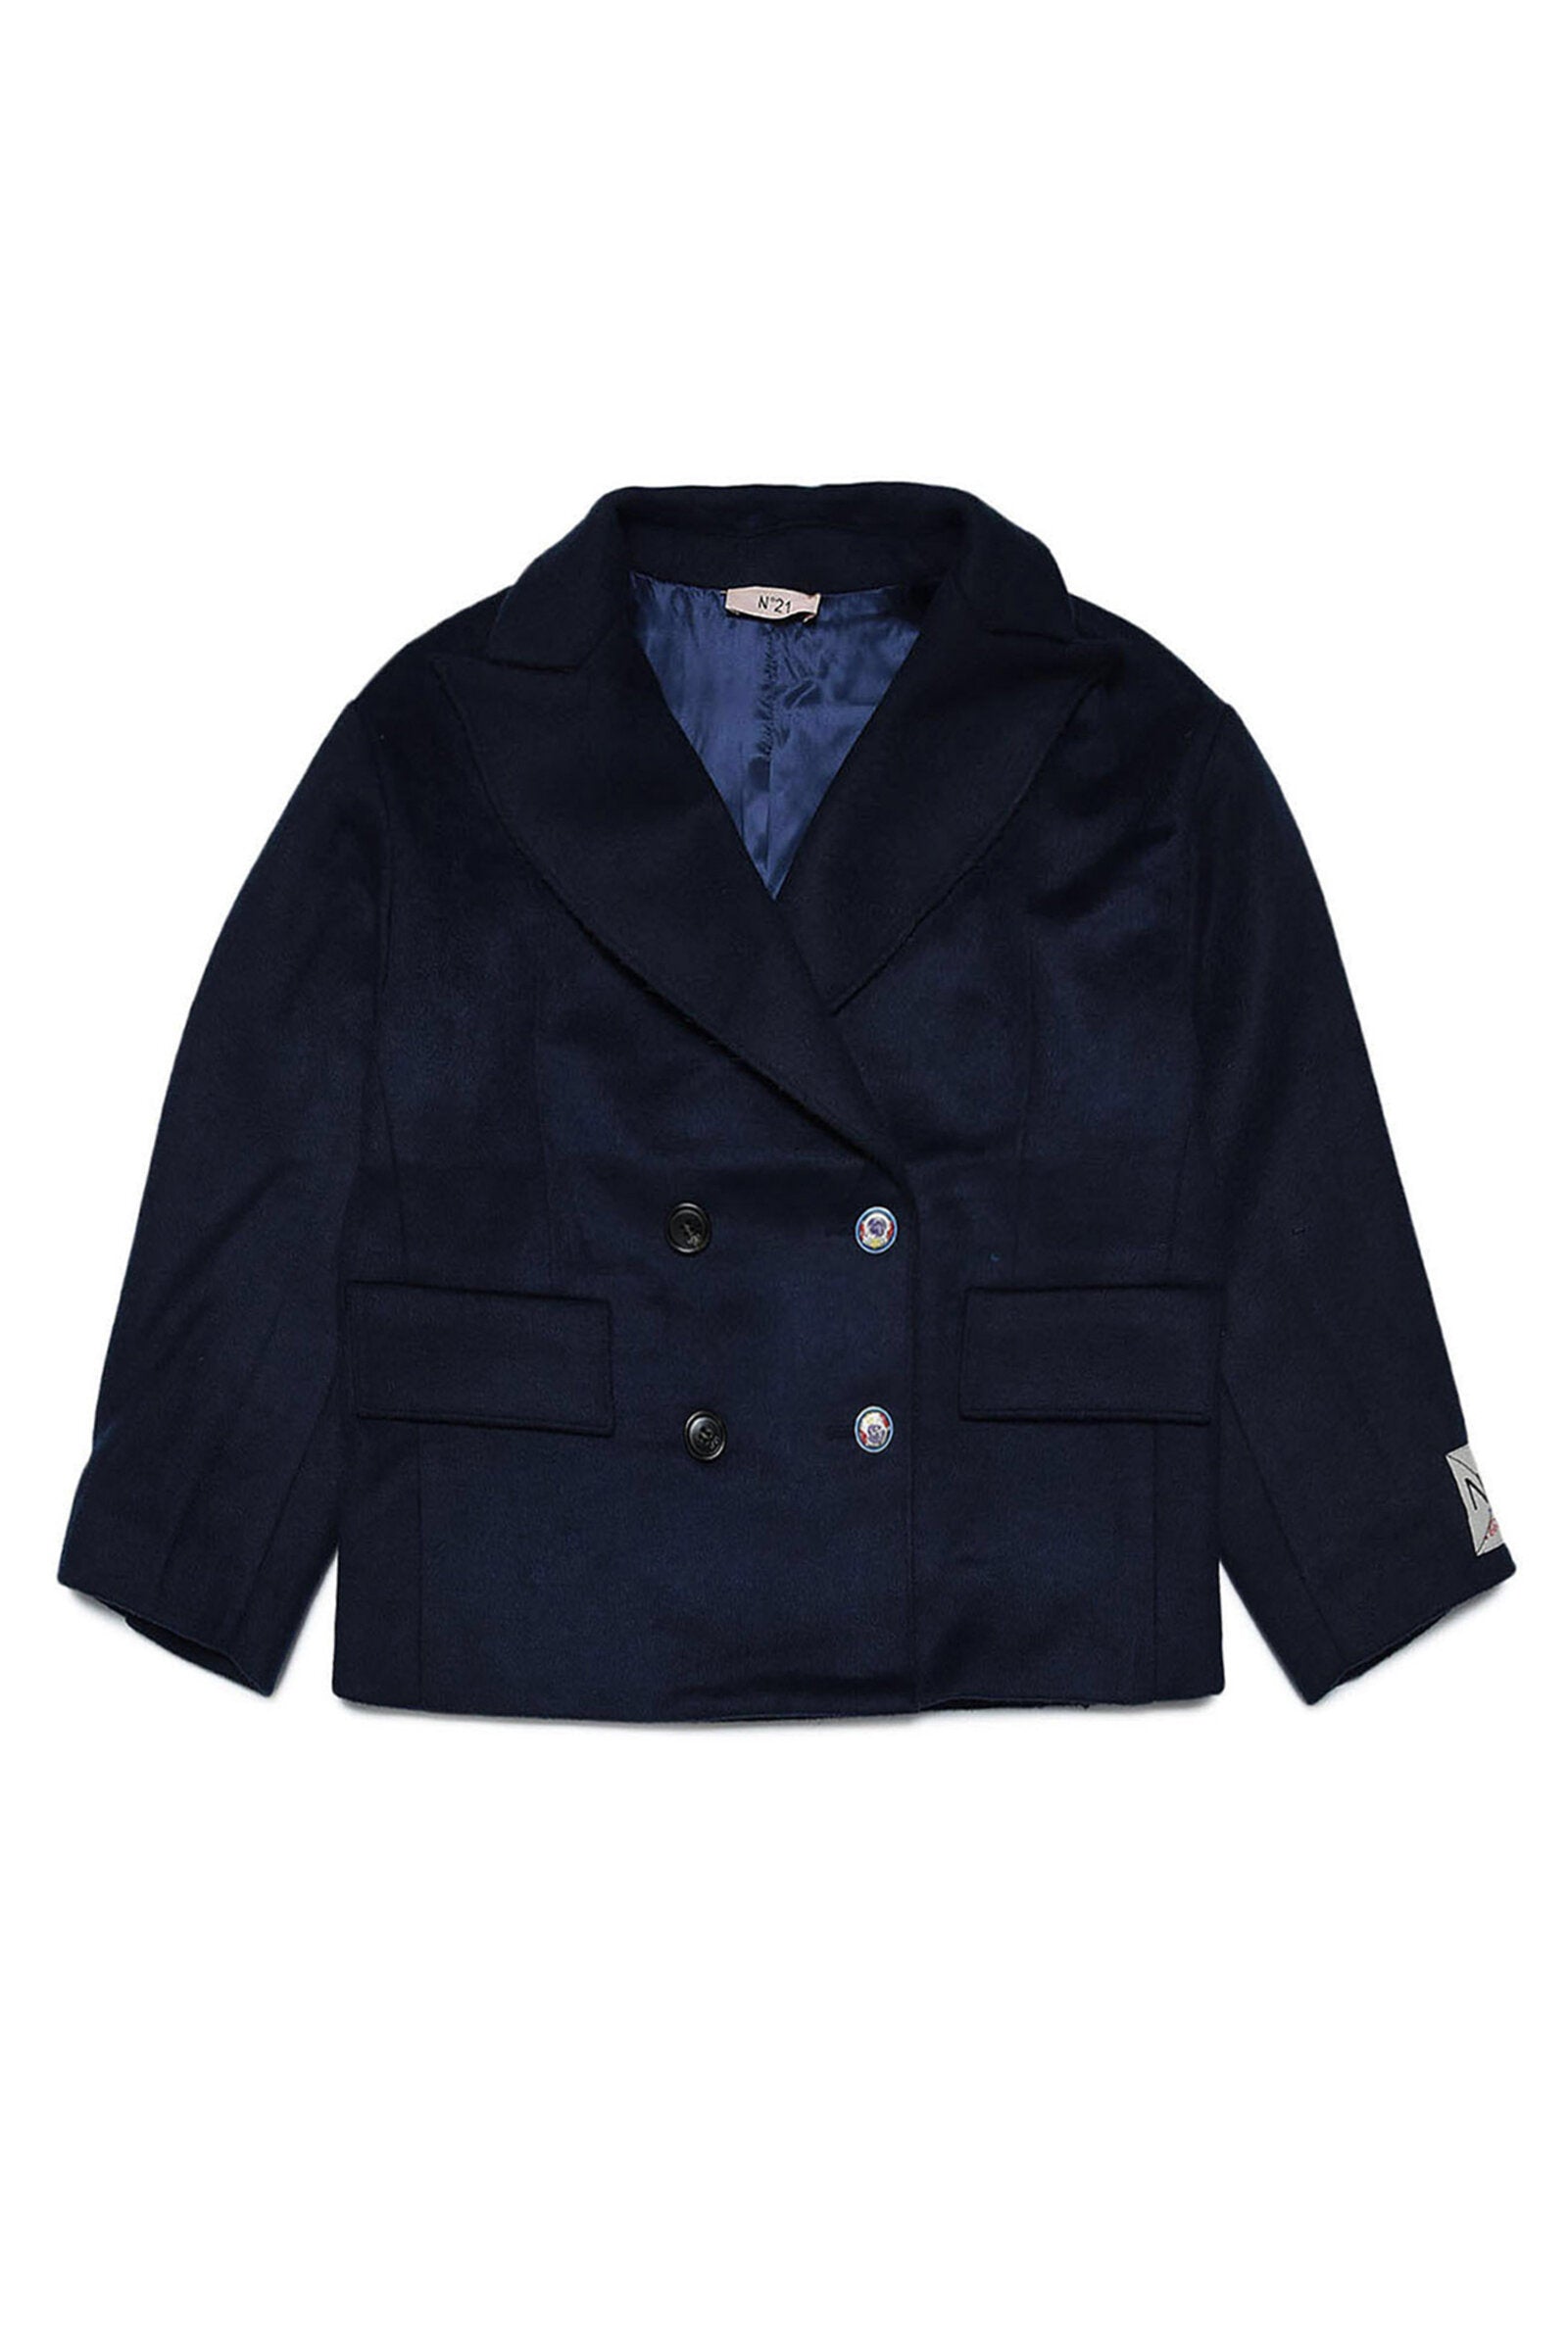 N°21 NAVY BLUE WOOL BLEND DOUBLE-BREASTED JACKET